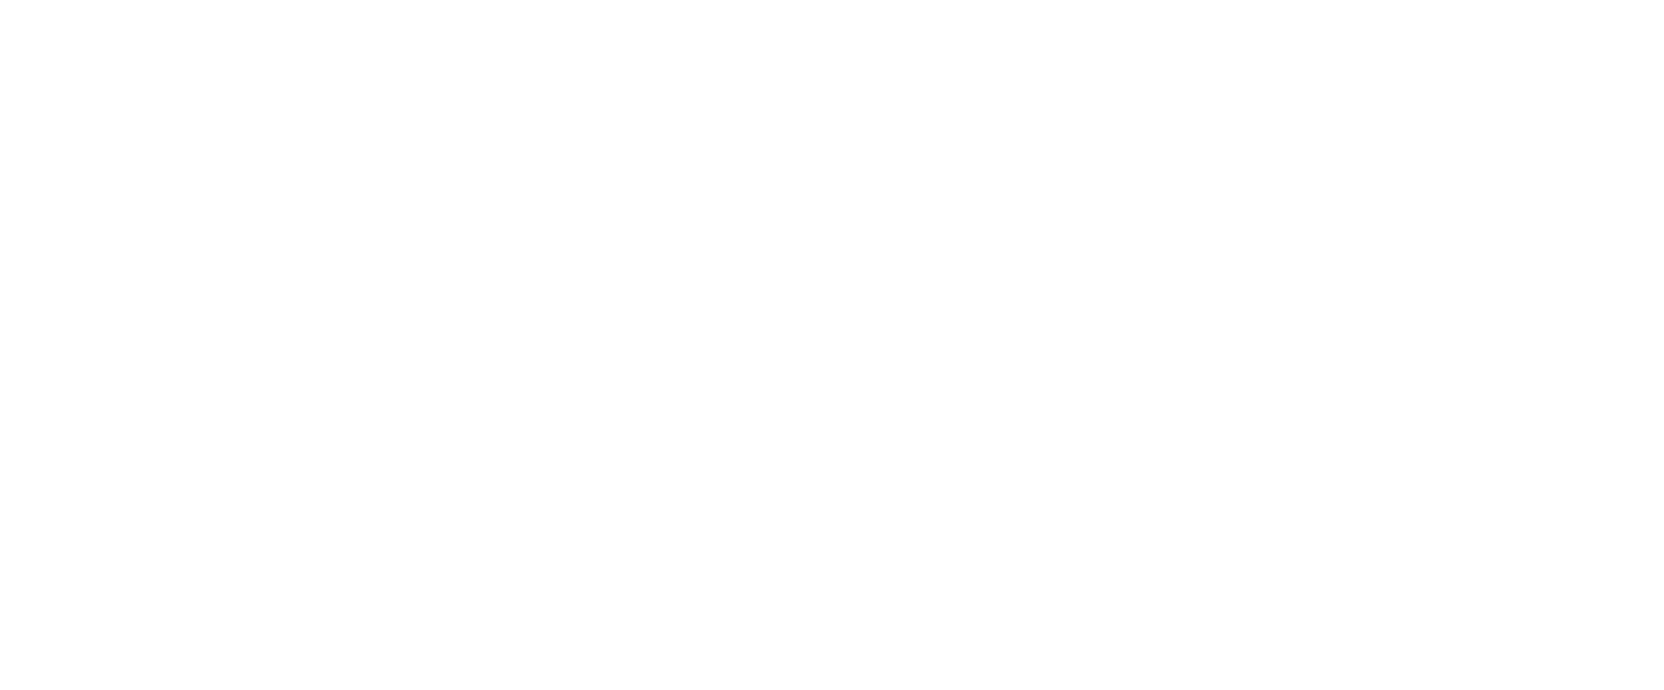 Indiana Lakes Guide